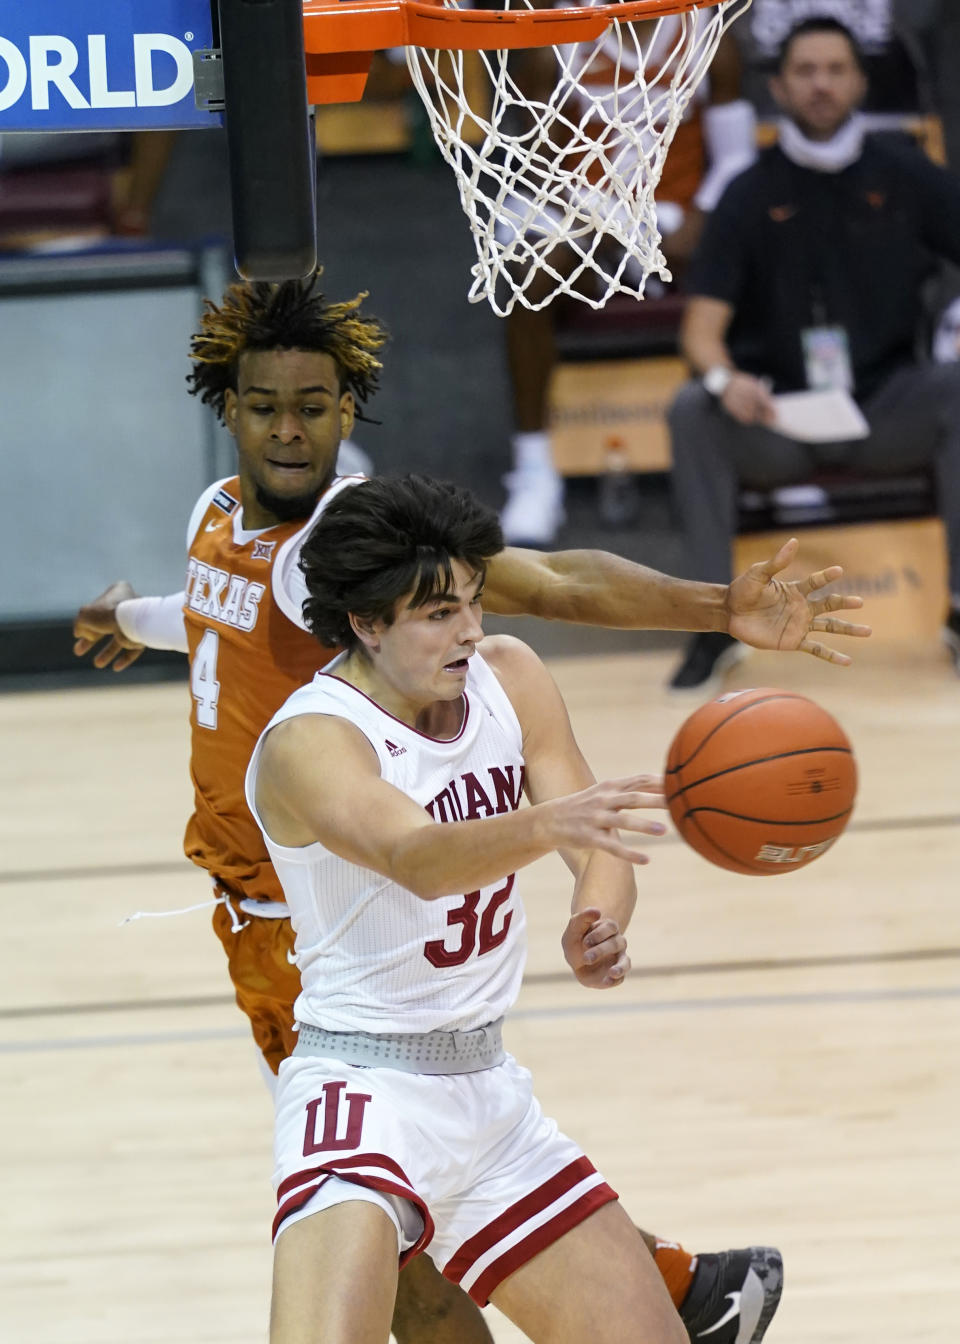 Indiana guard Trey Galloway (32) pass the ball away from Texas forward Greg Brown (4) in the first half of a semifinal NCAA college basketball game in the Maui Invitational tournament, Tuesday, Dec. 1, 2020, in Asheville, N.C. (AP Photo/Kathy Kmonicek)